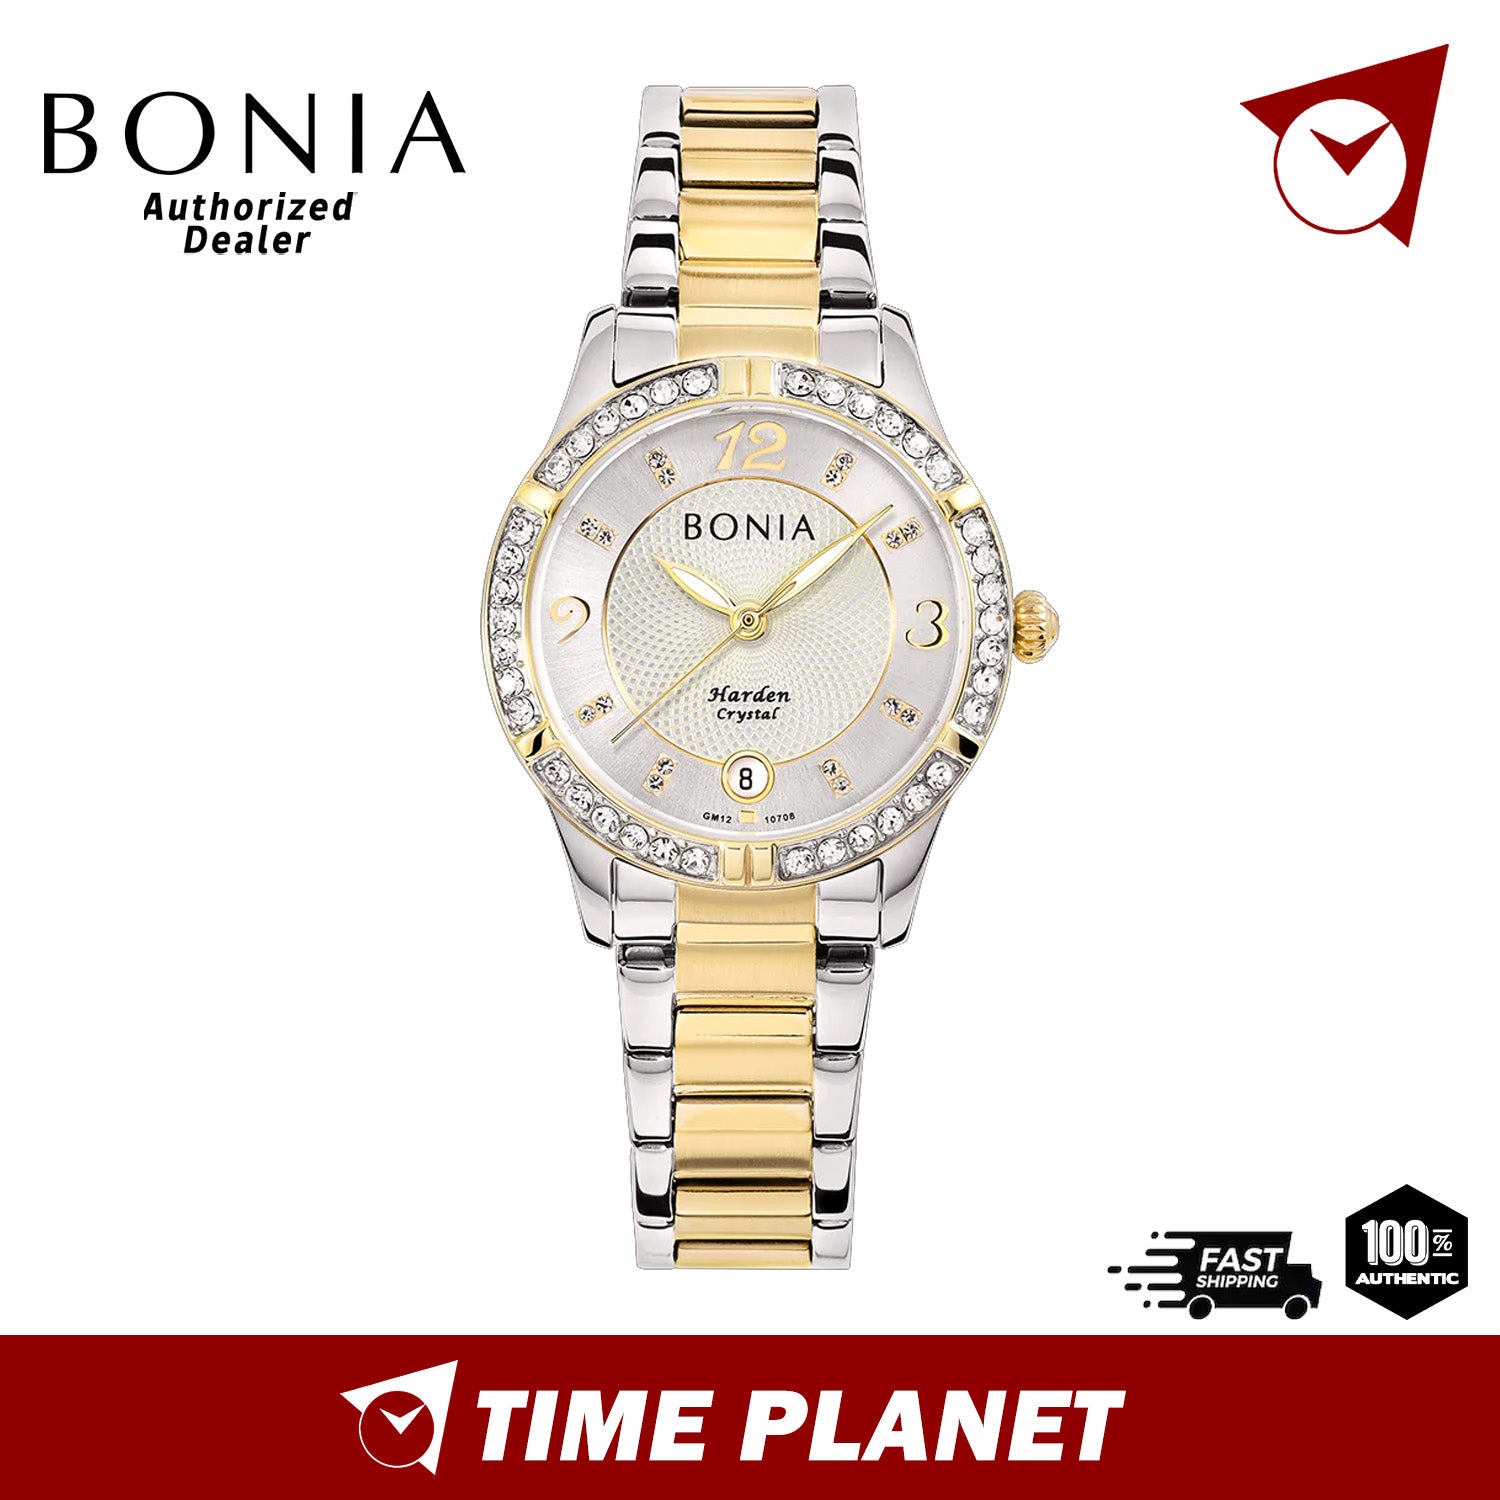 The opulent Bonia Sonia Collection - where luxury meets elegance in a  ladies' watch like no other. With its distinctive case shape… | Instagram